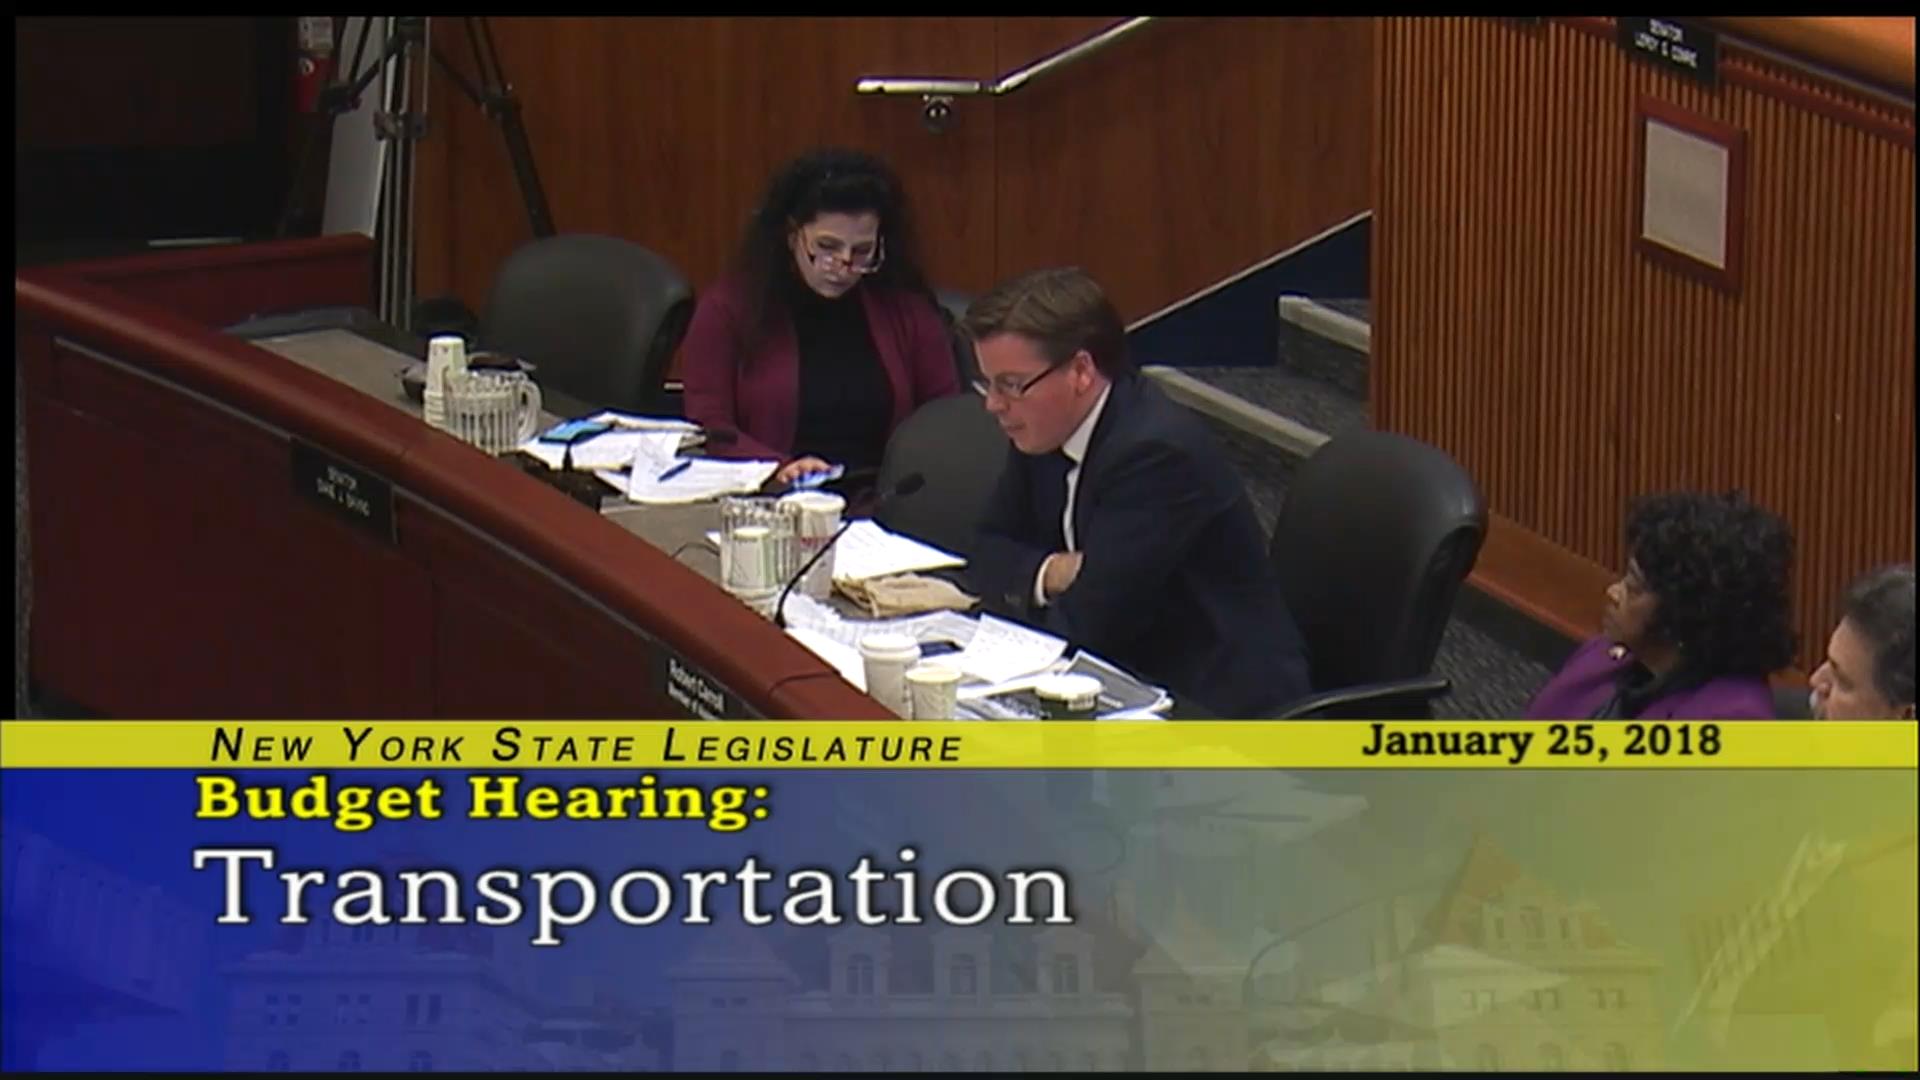 Budget Hearing on Transportation in New York